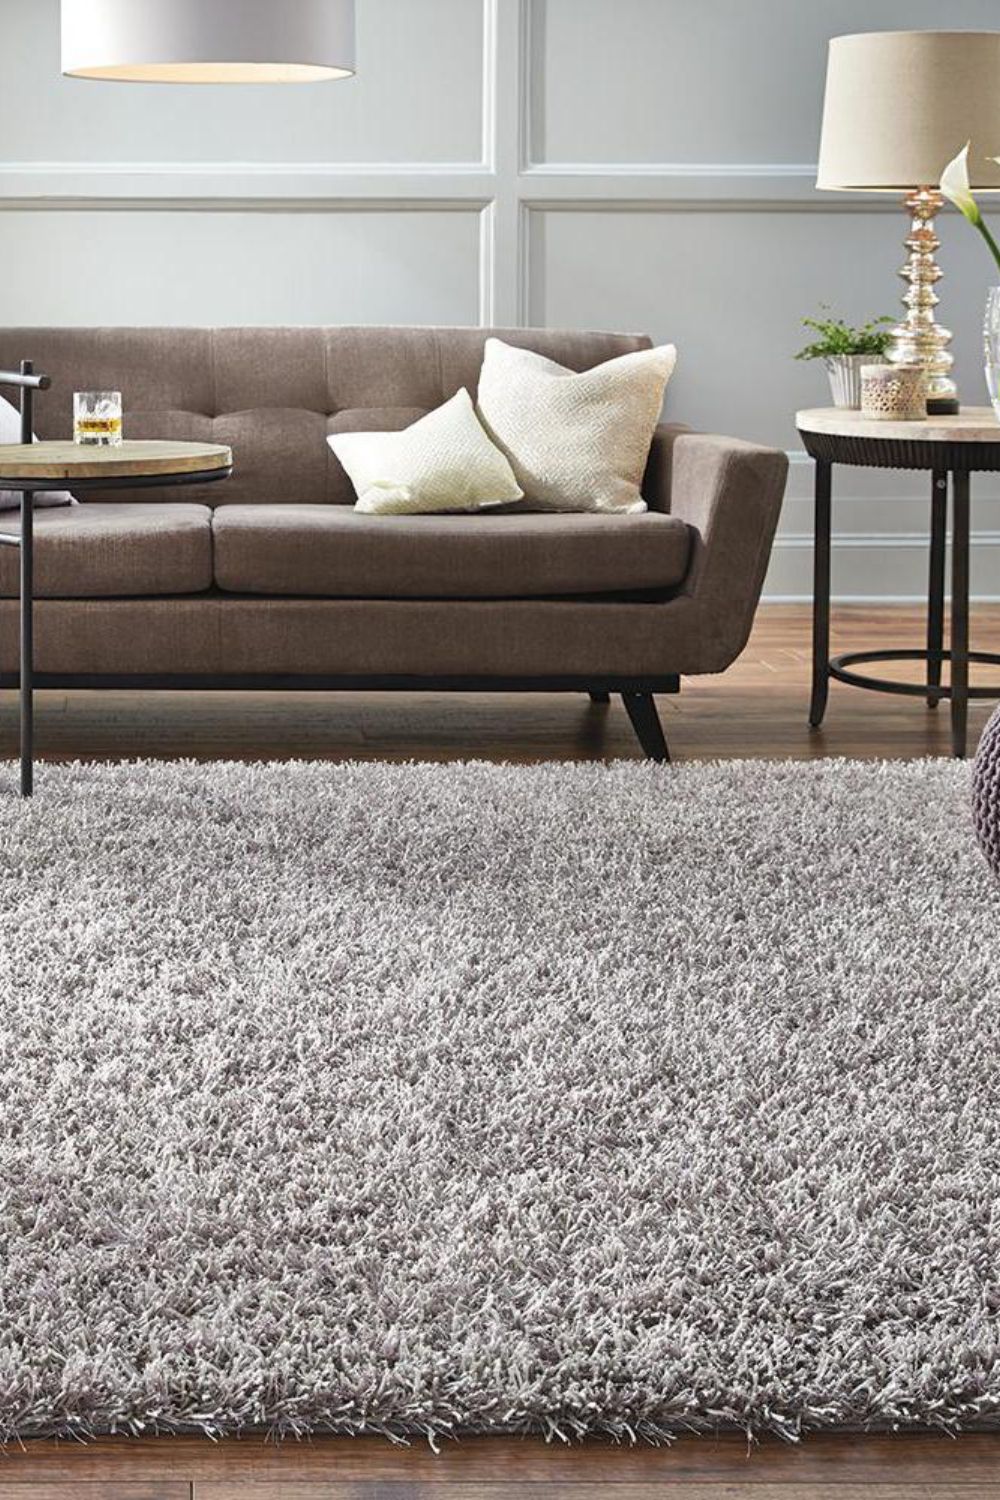 The Functional Advantages of Carpets in Homes